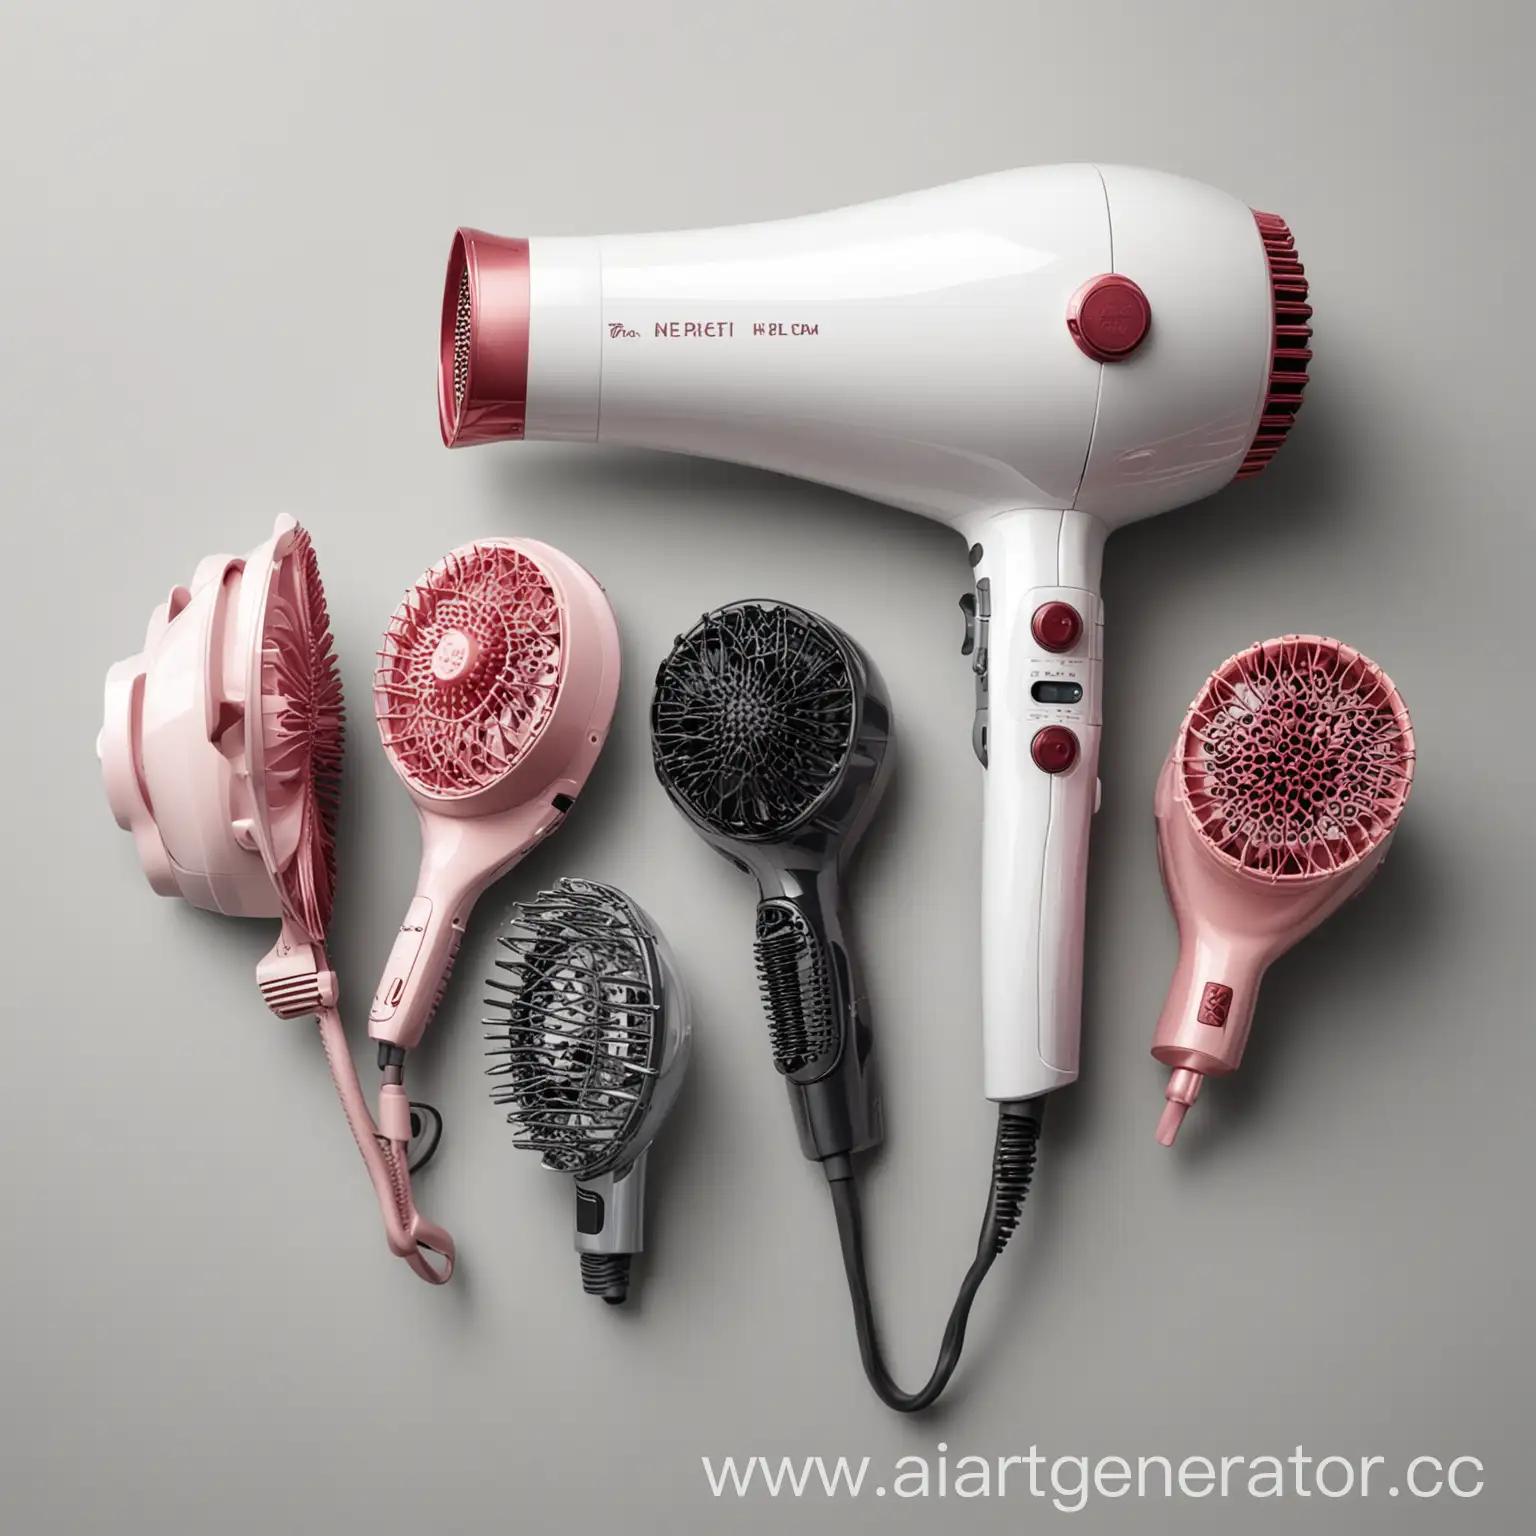 HighEnd-Hair-Dryer-with-Three-Attachments-on-White-Background